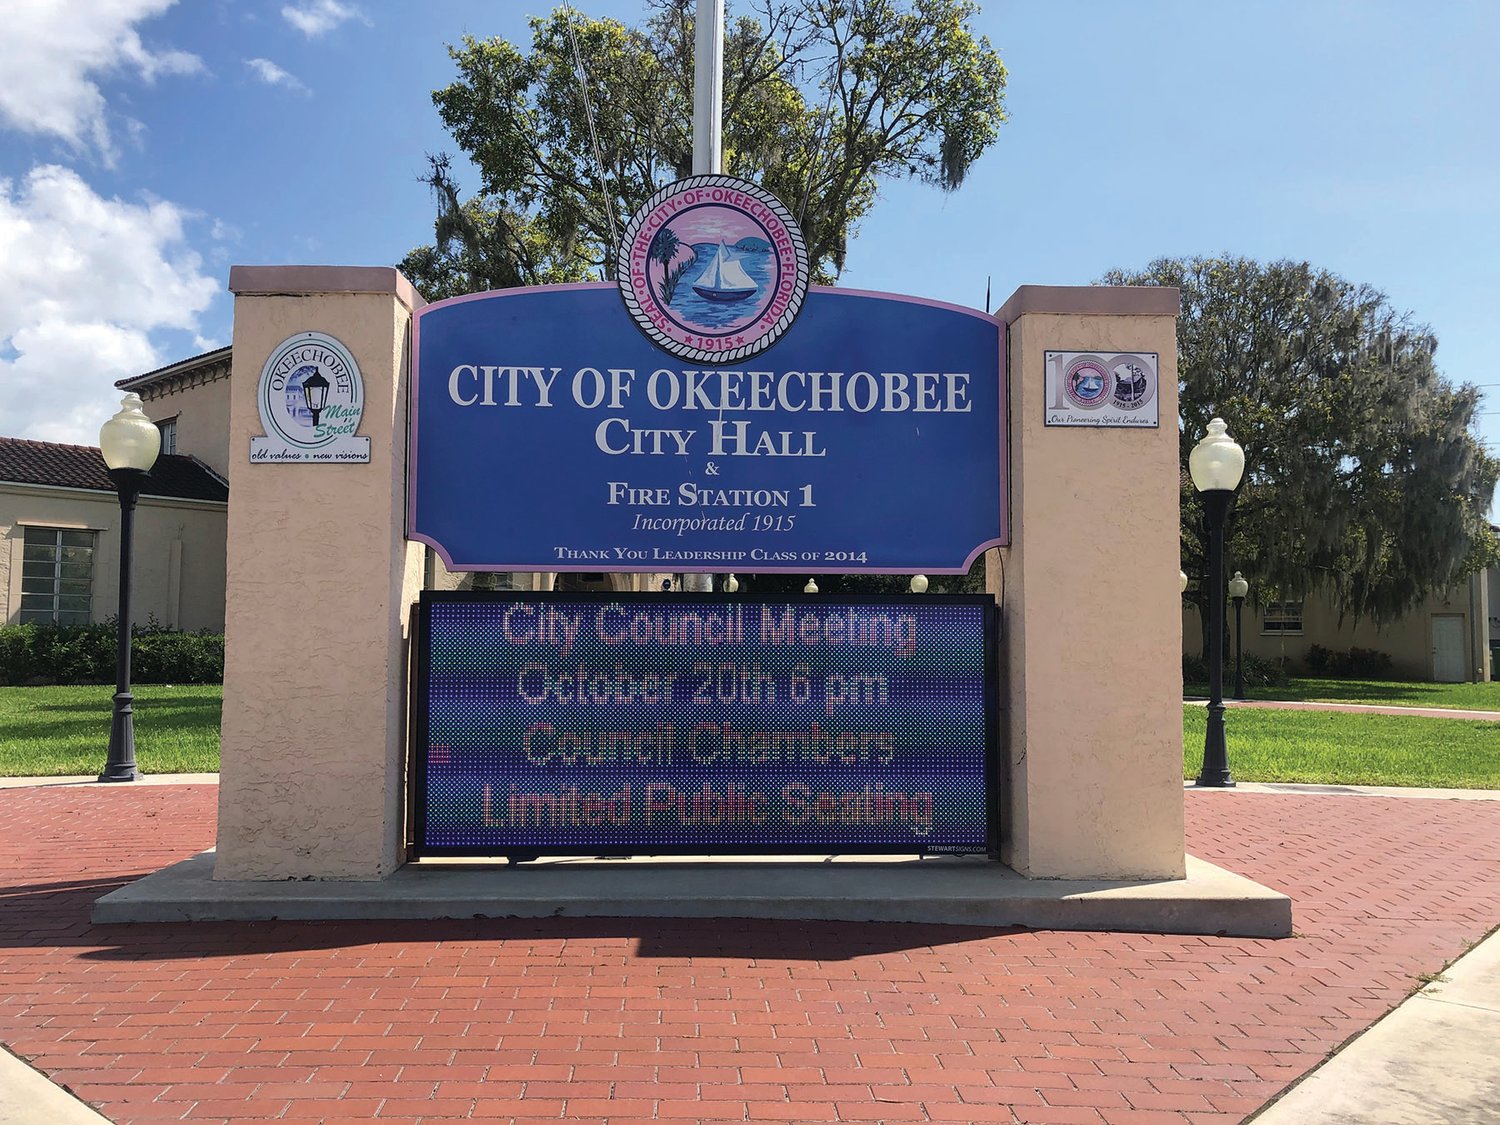 OKEECHOBEE — The Okeechobee City Council meets twice a month on the first and third Tuesdays at 6 p.m.